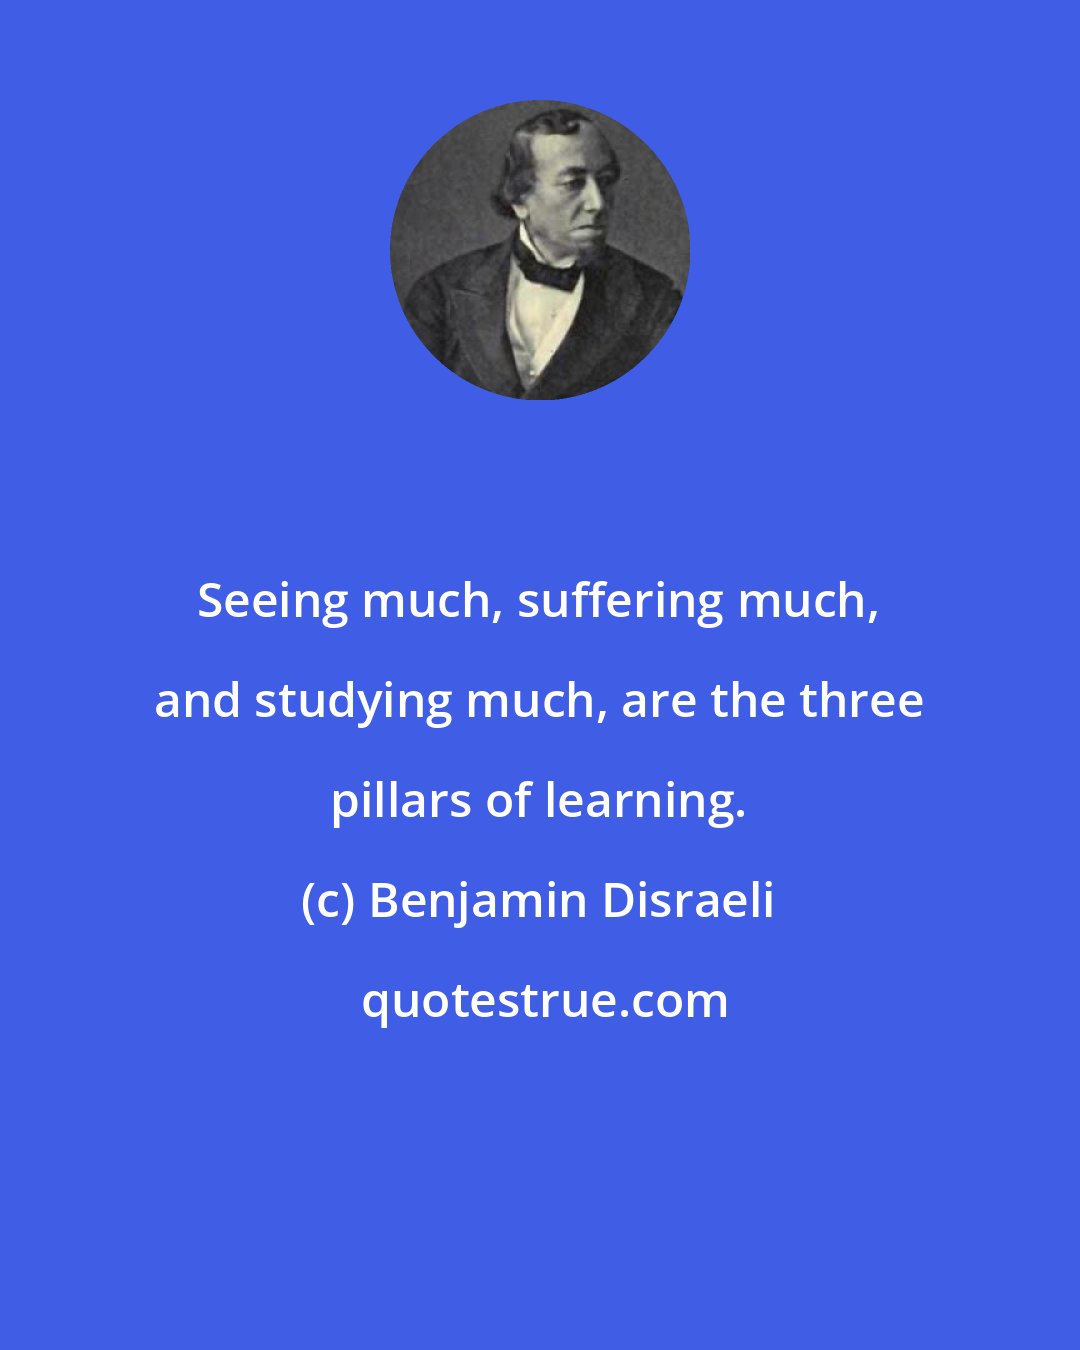 Benjamin Disraeli: Seeing much, suffering much, and studying much, are the three pillars of learning.